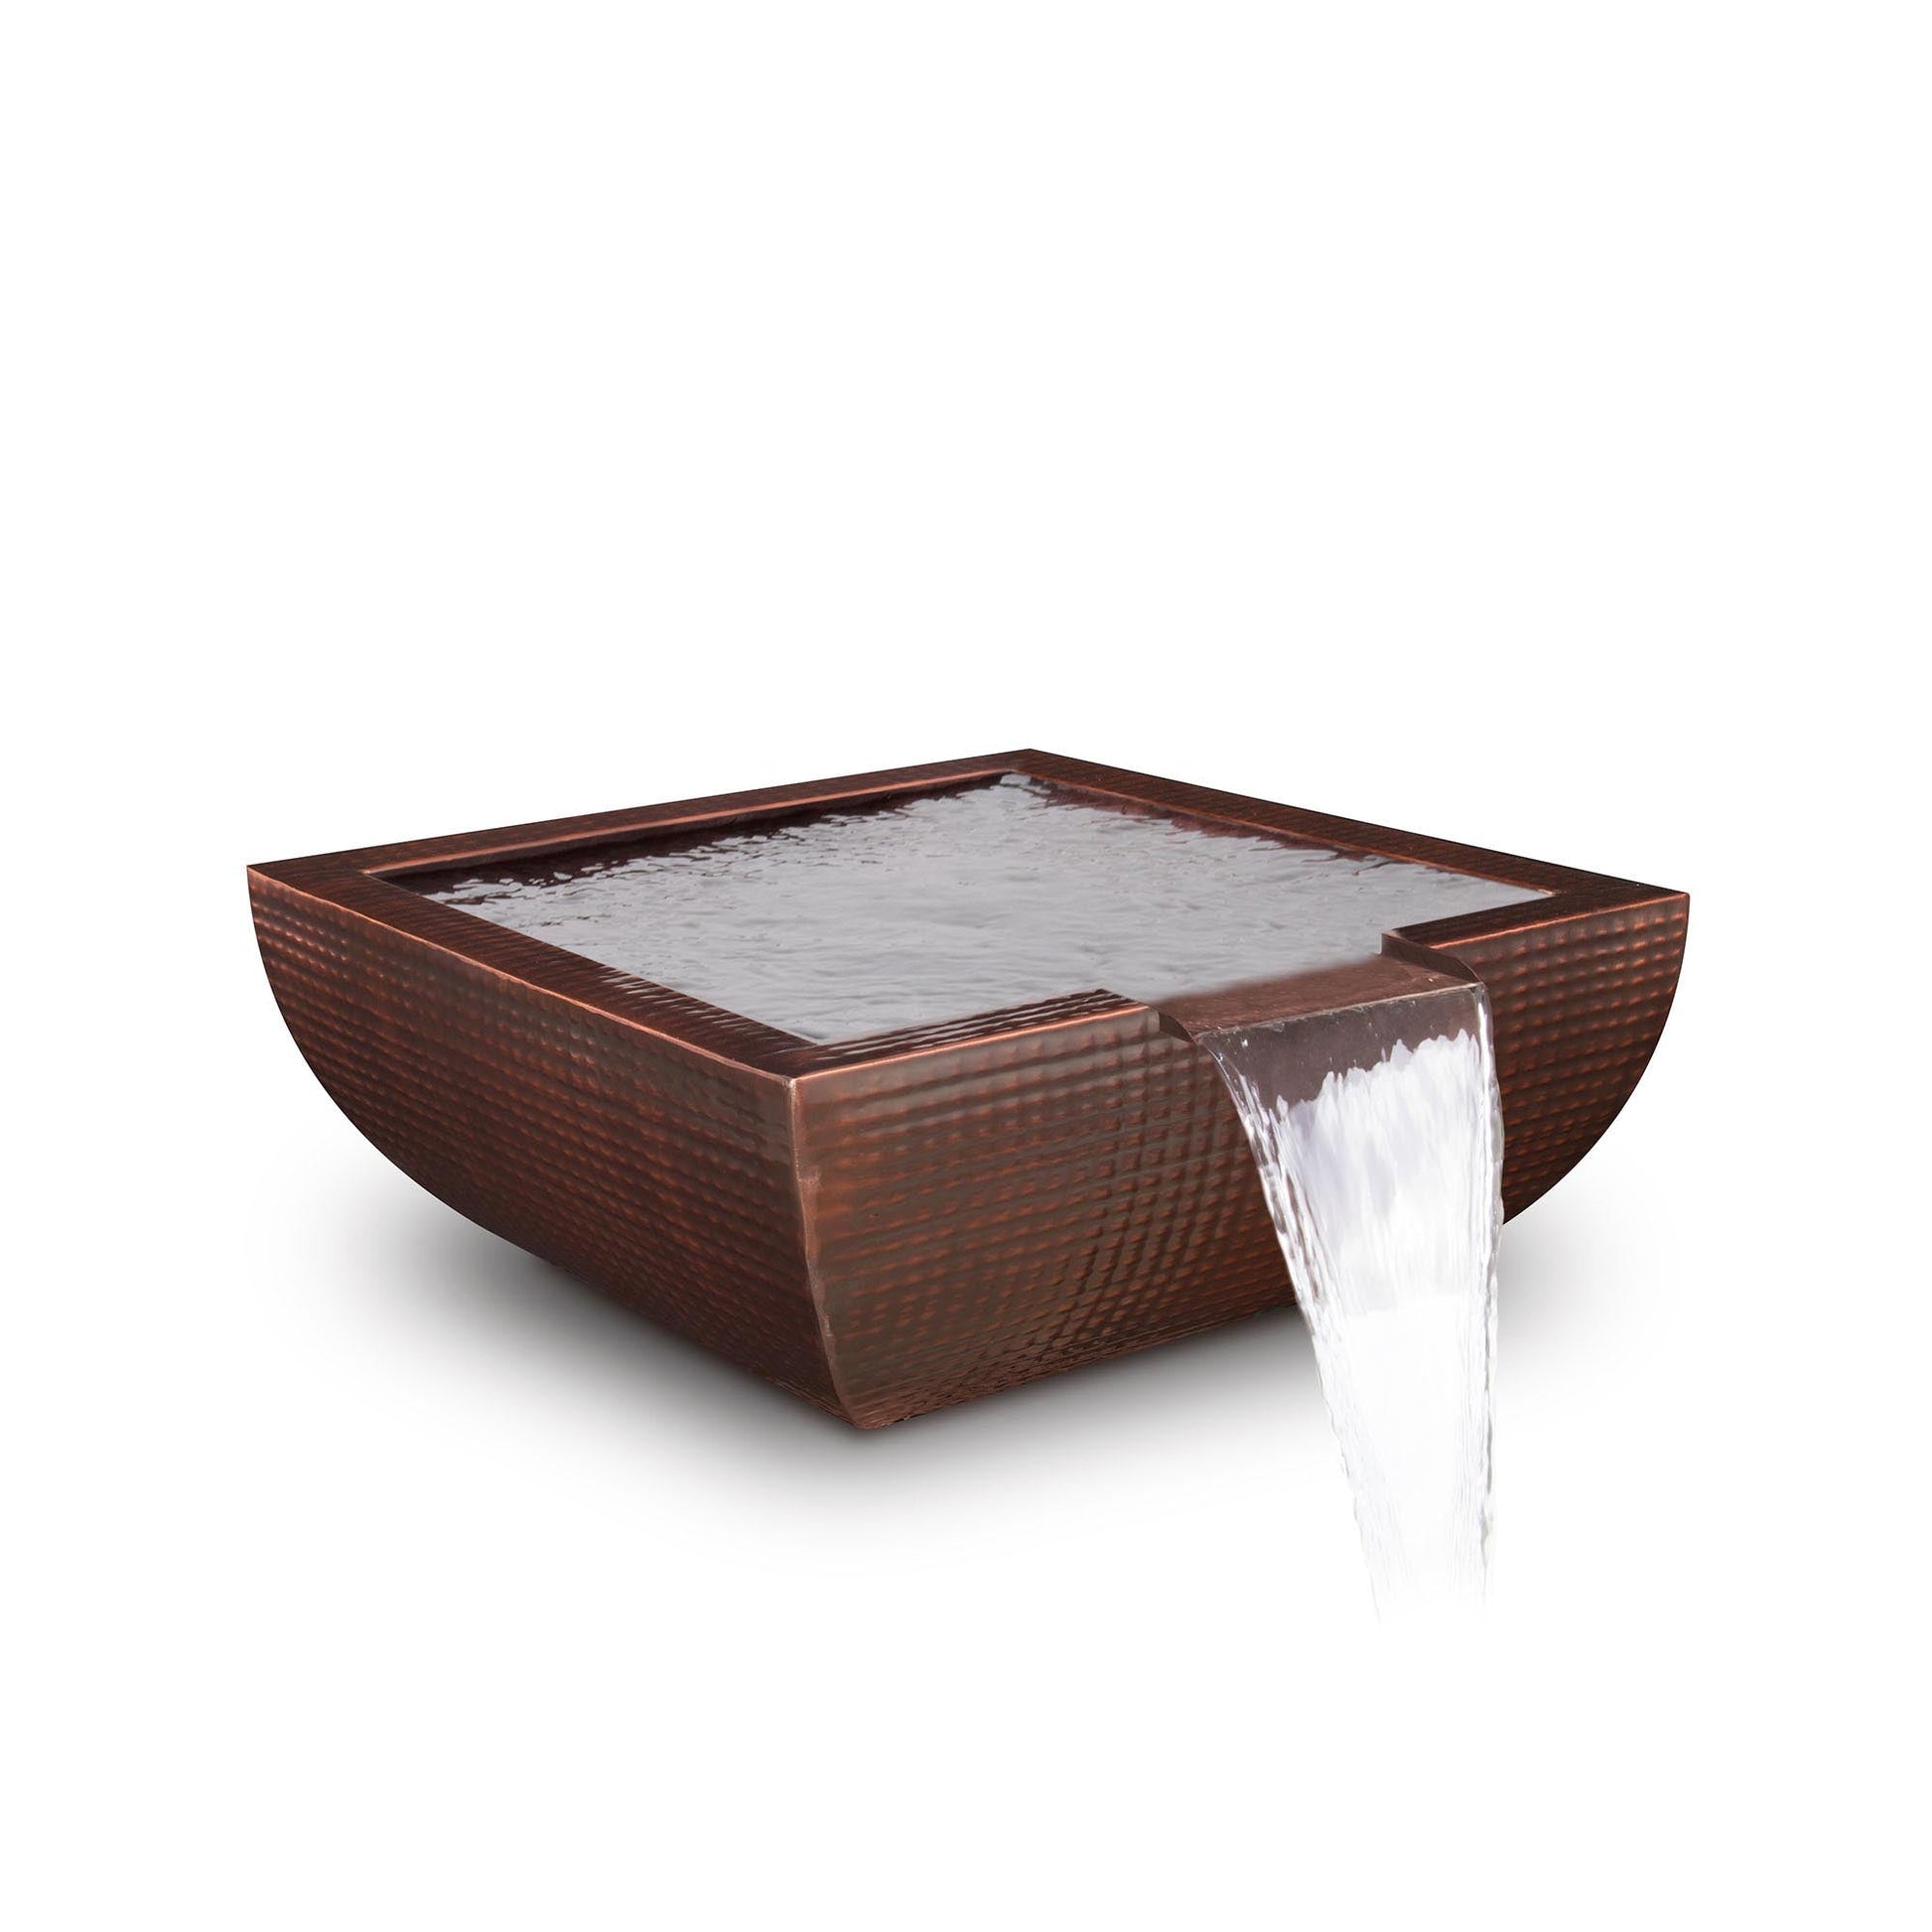 The Outdoor Plus Square Avalon 24" Java Powder Coated Water Bowl